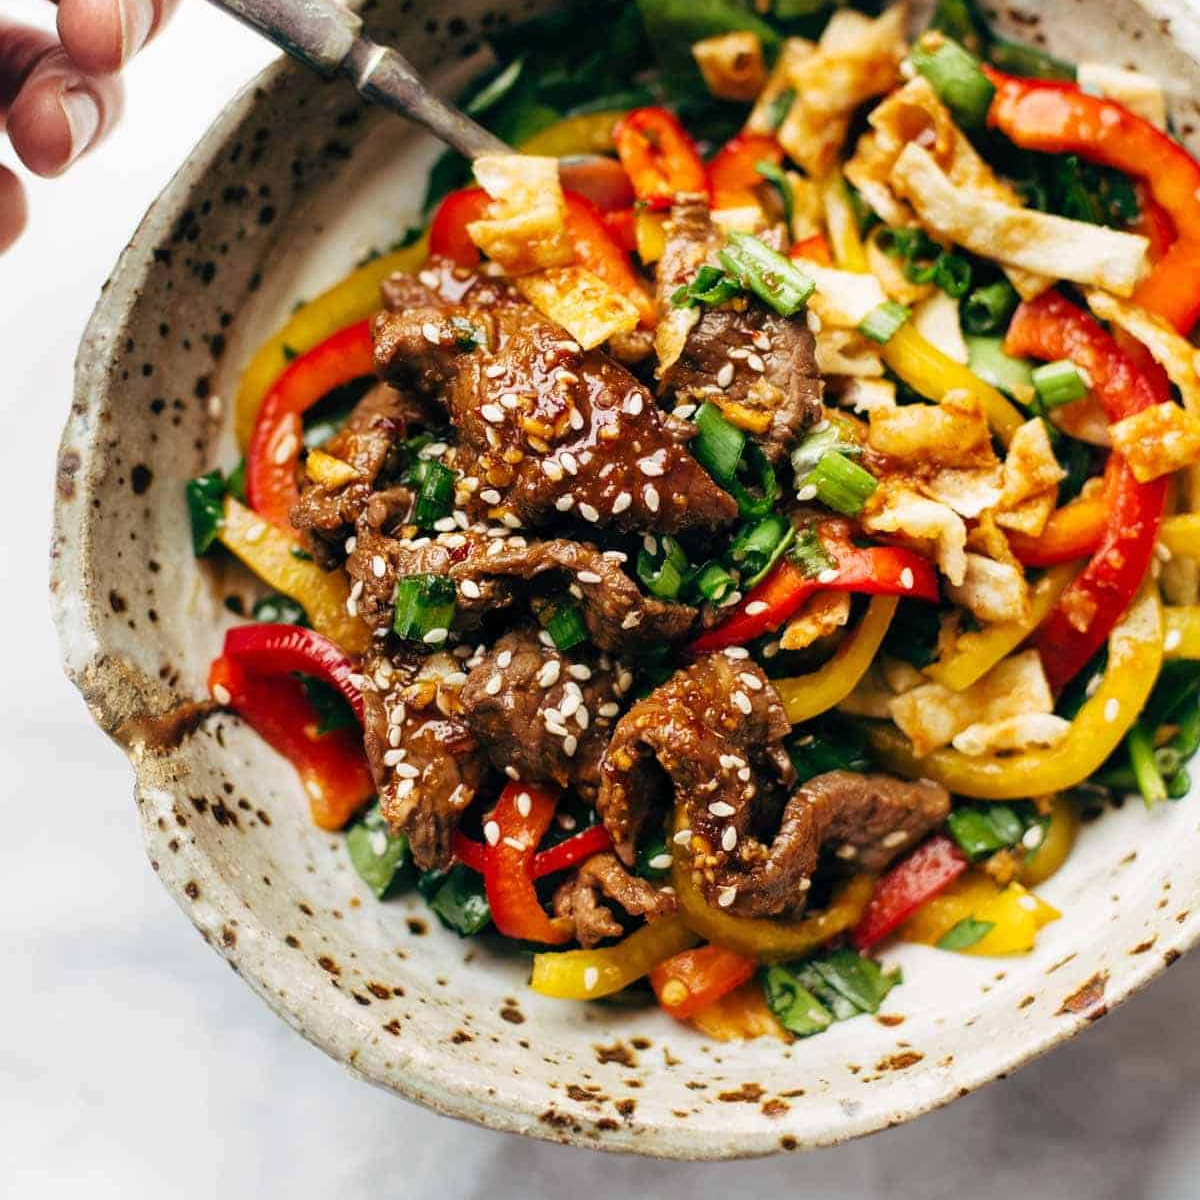 Korean steak sitting on a bed of colorful peppers.